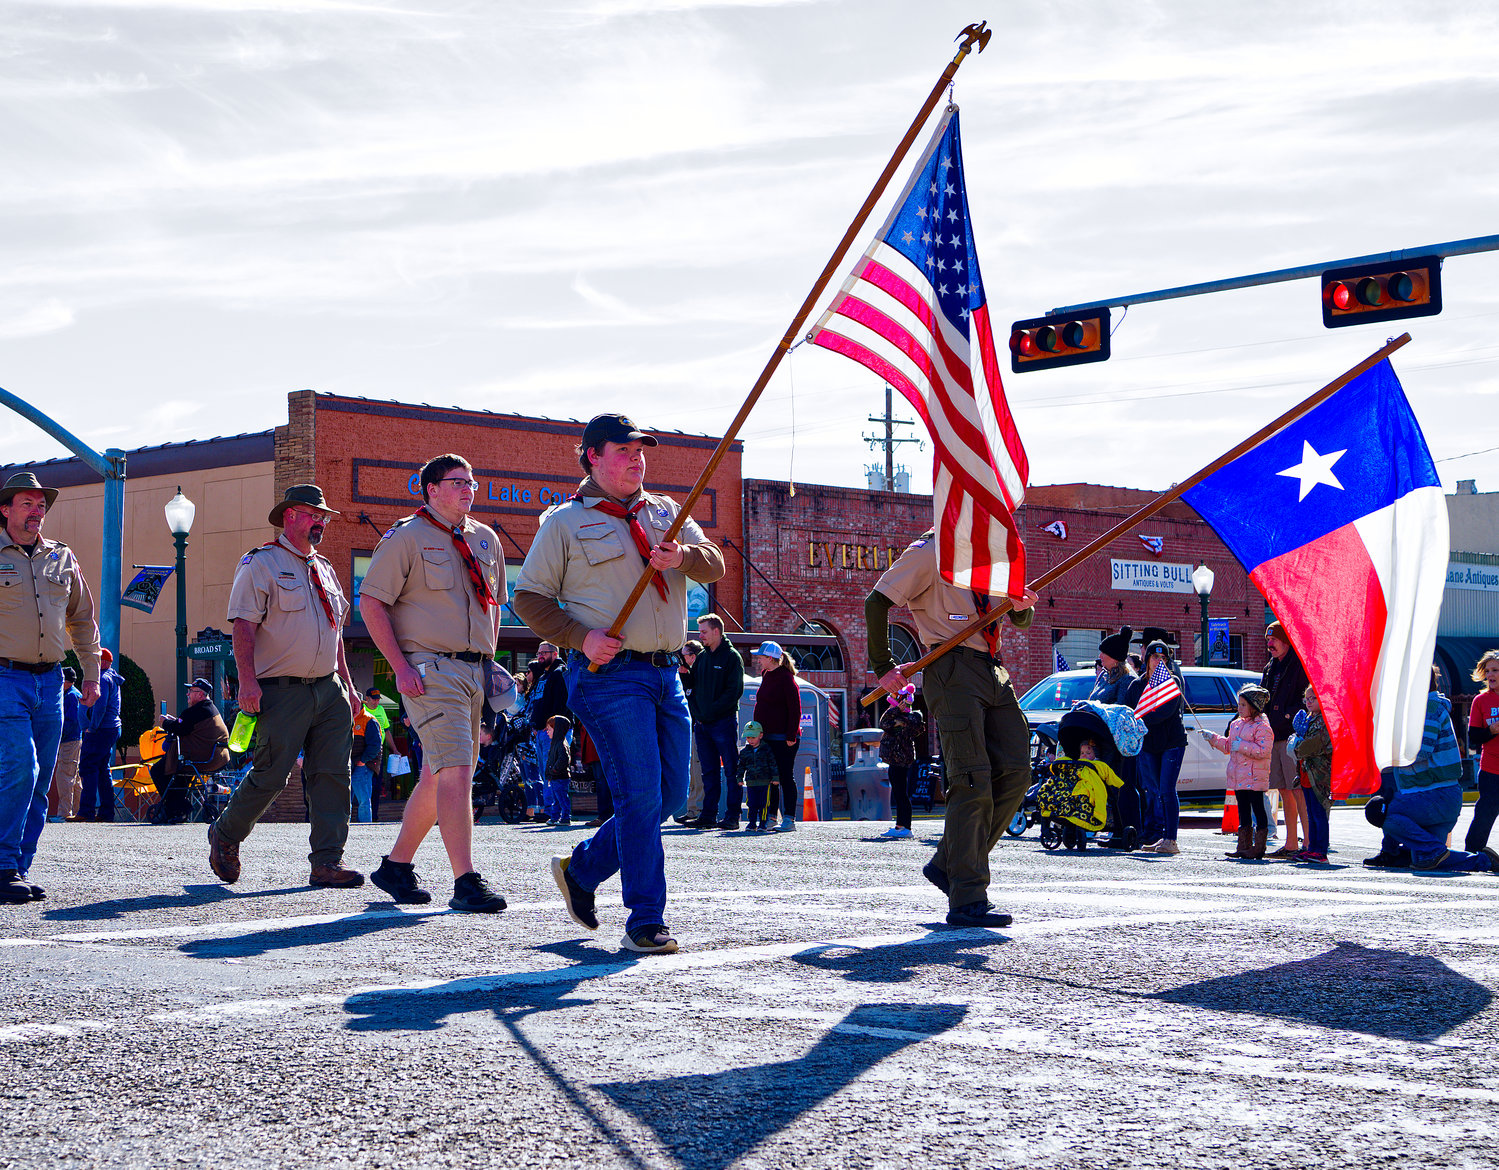 Bearing the colors for the recent Veterans Day parade in Mineola were members of Boy Scout Troop 385.